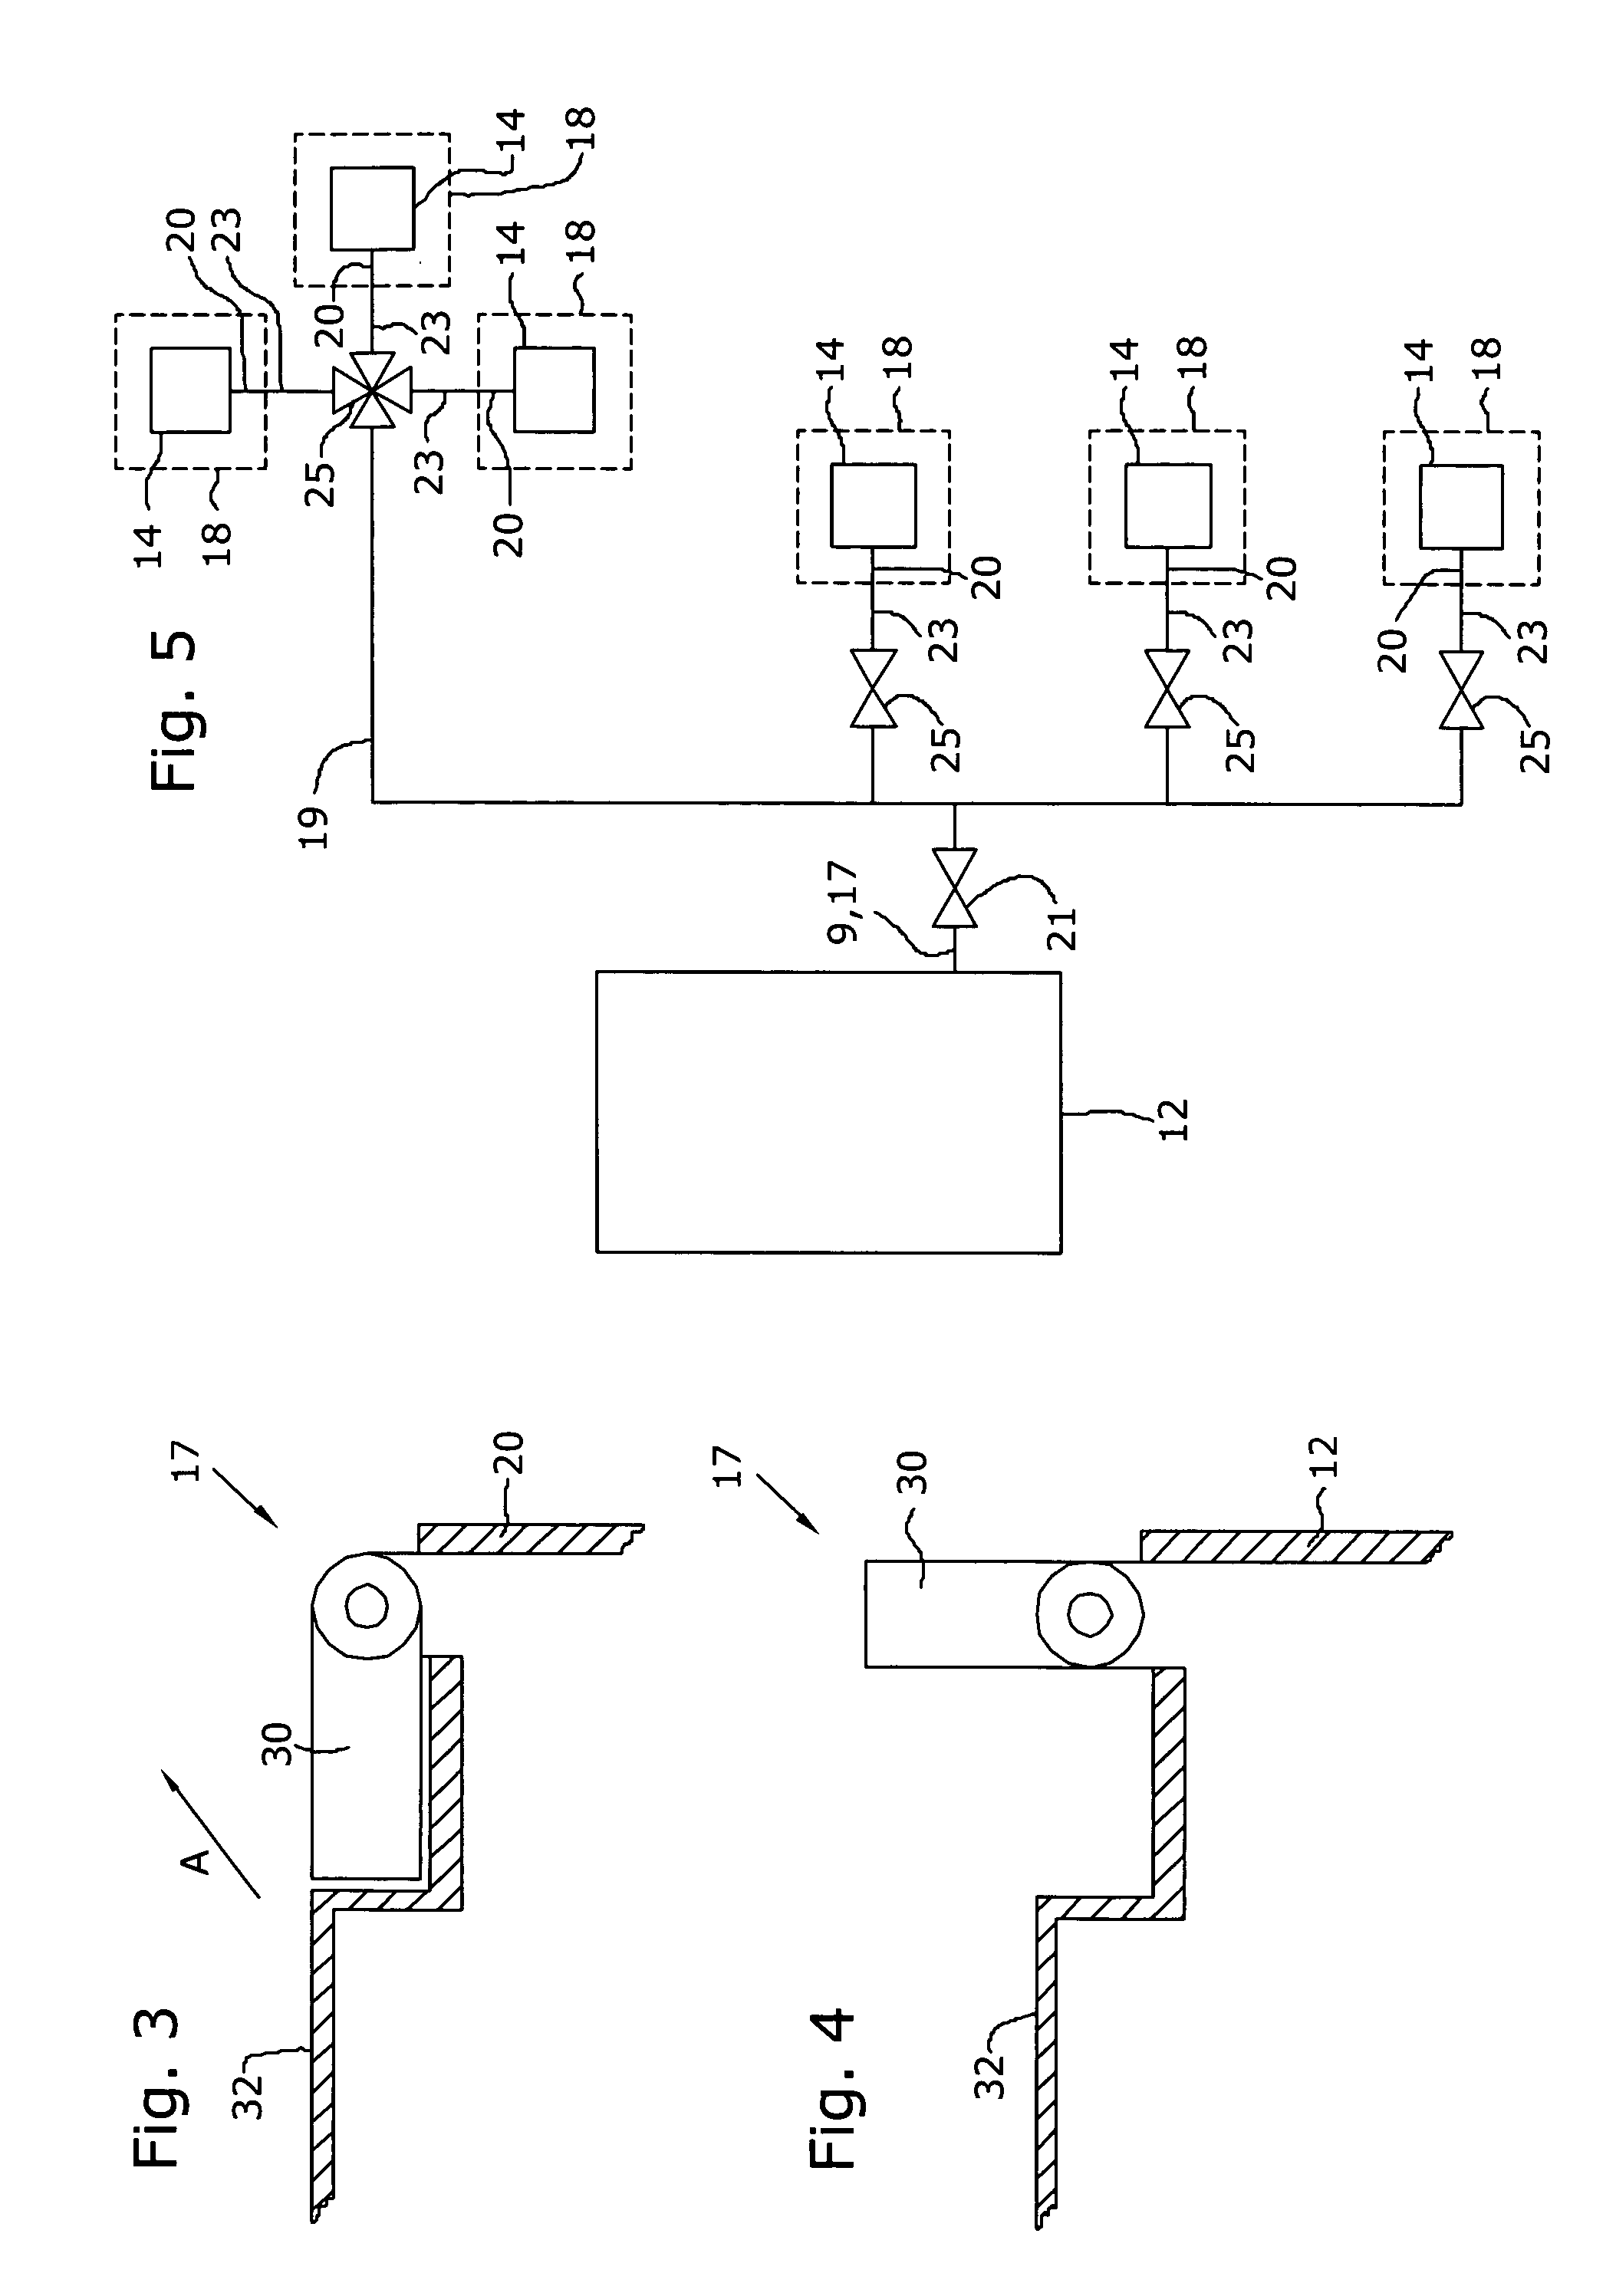 Method and apparatus for filling a fuel container